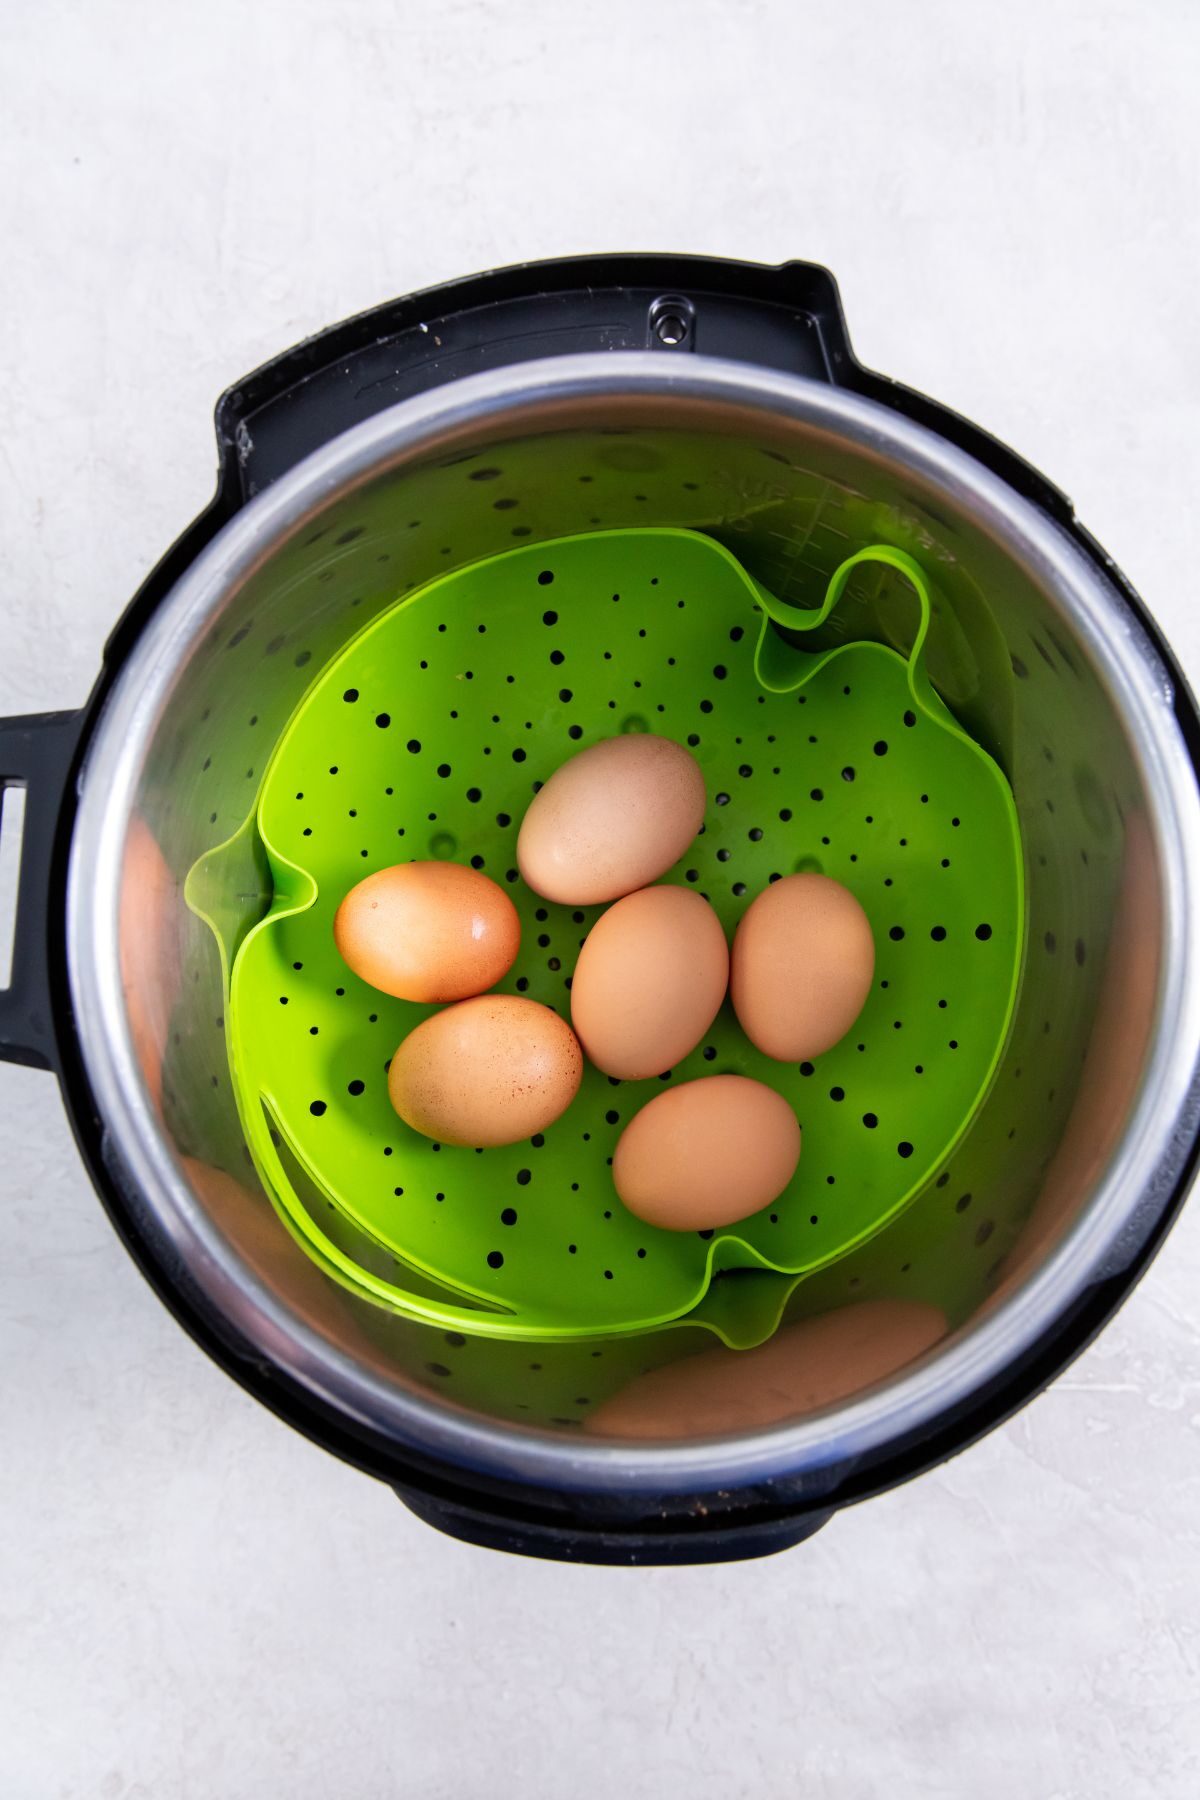 trivet in the instant pot with eggs on it.